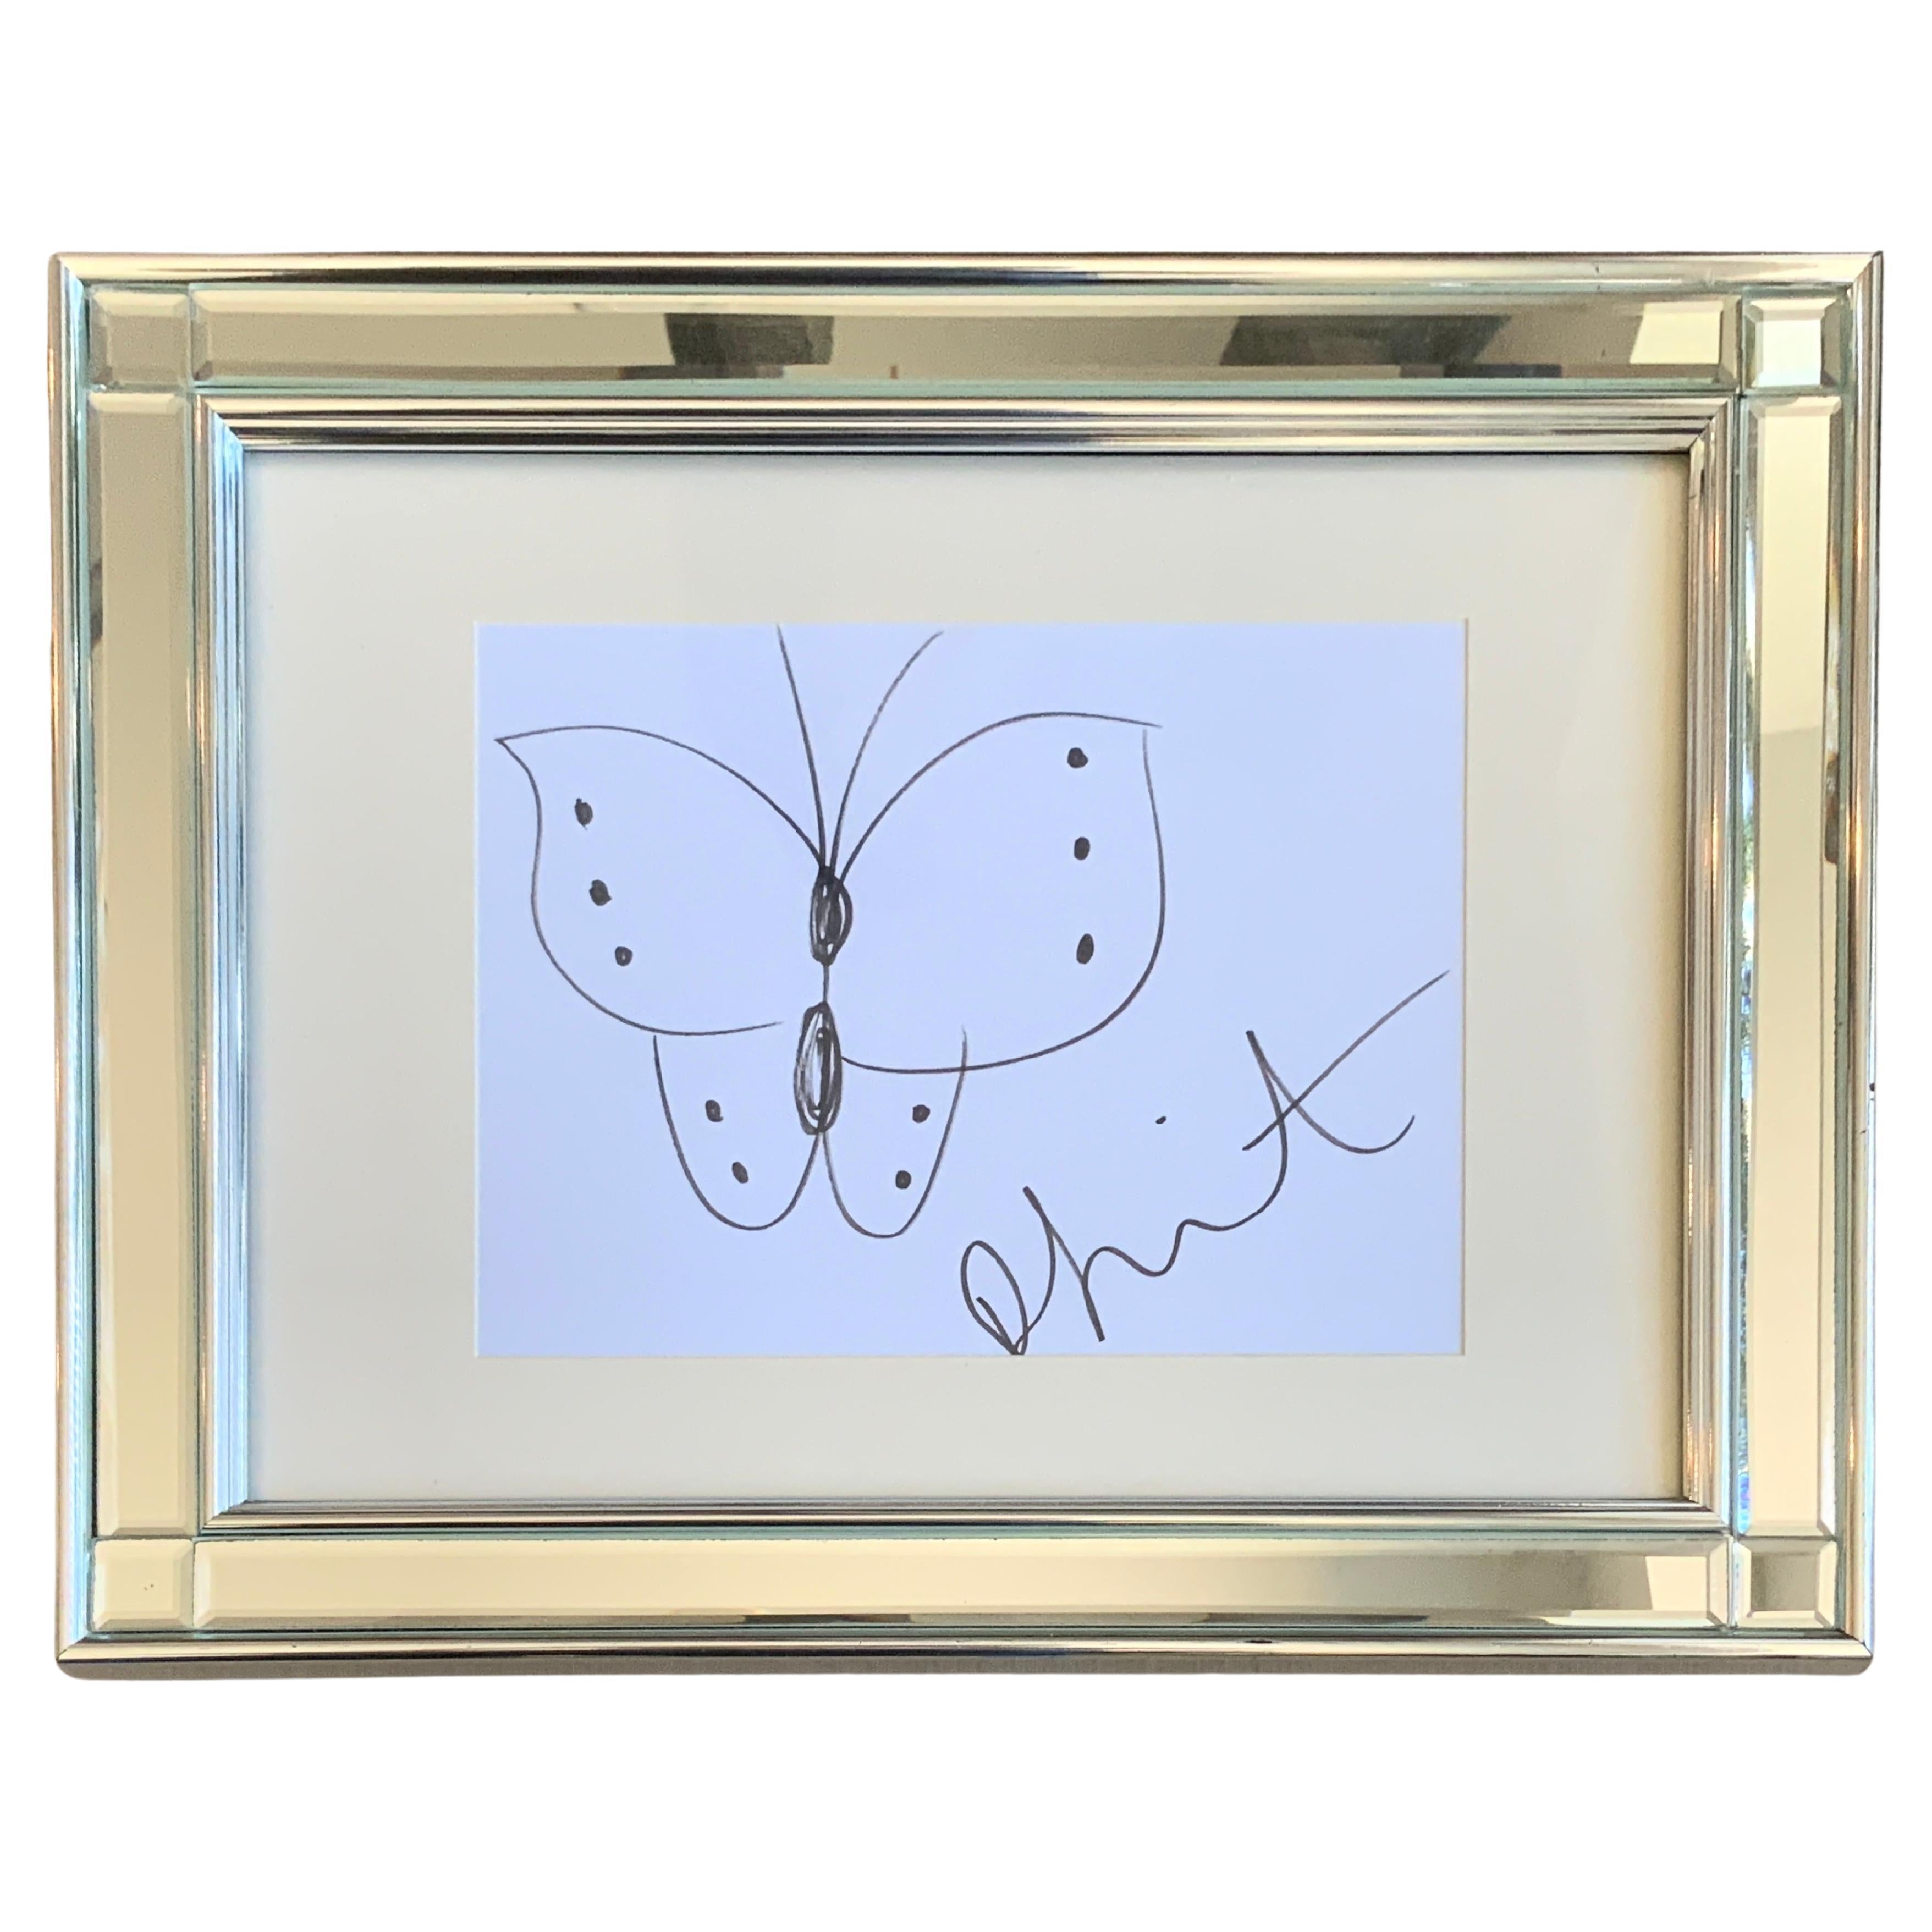 Damien Hirst Butterfly Original Drawing on Paper, ca. 1990’s For Sale